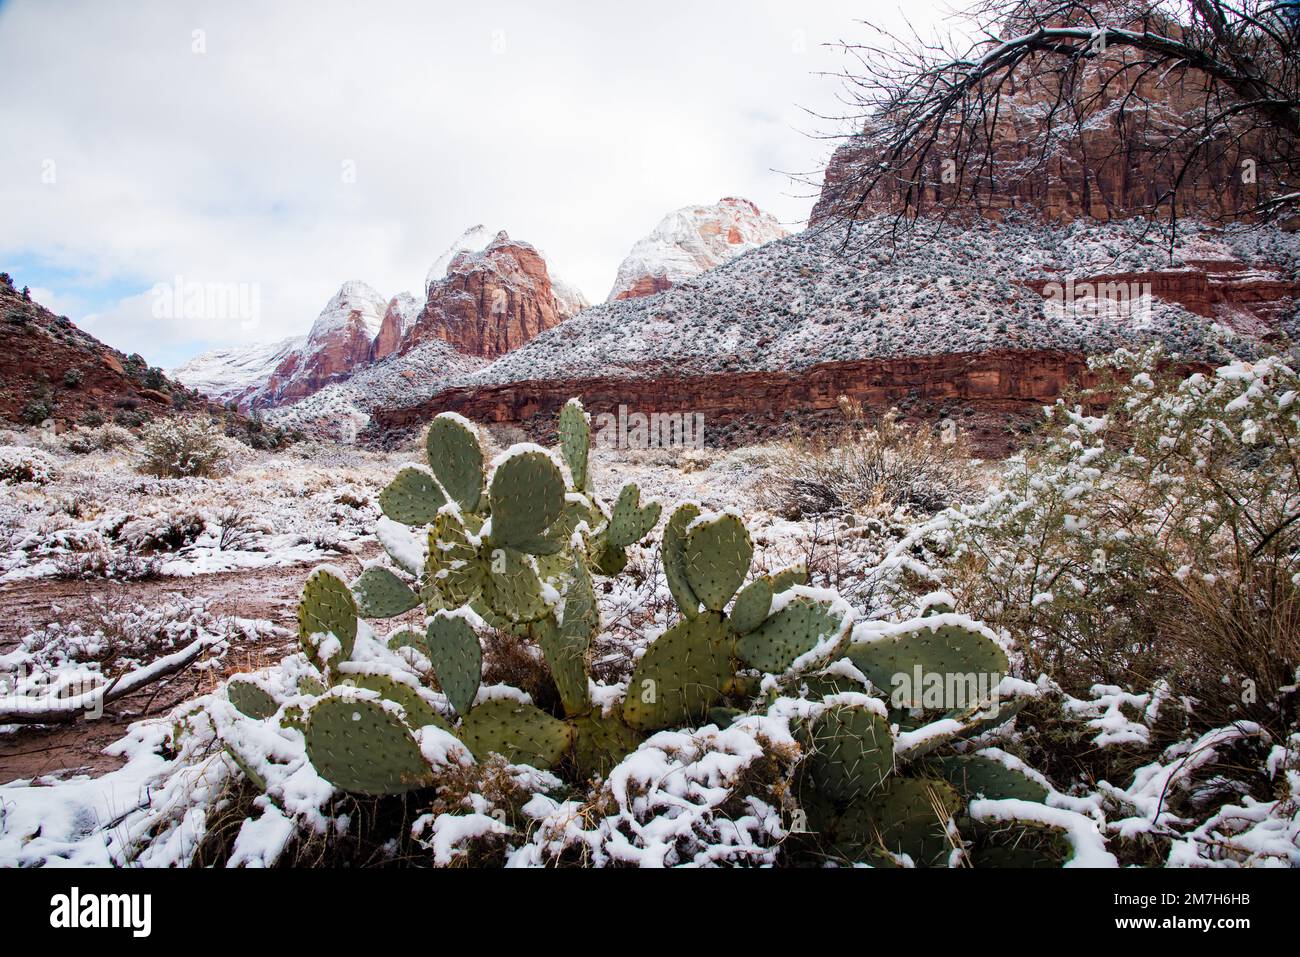 Winter snowfall in Zions National Park, Utah, USA.  This magnificent park is transformed into a winter wonderland after a heavy storm. Stock Photo